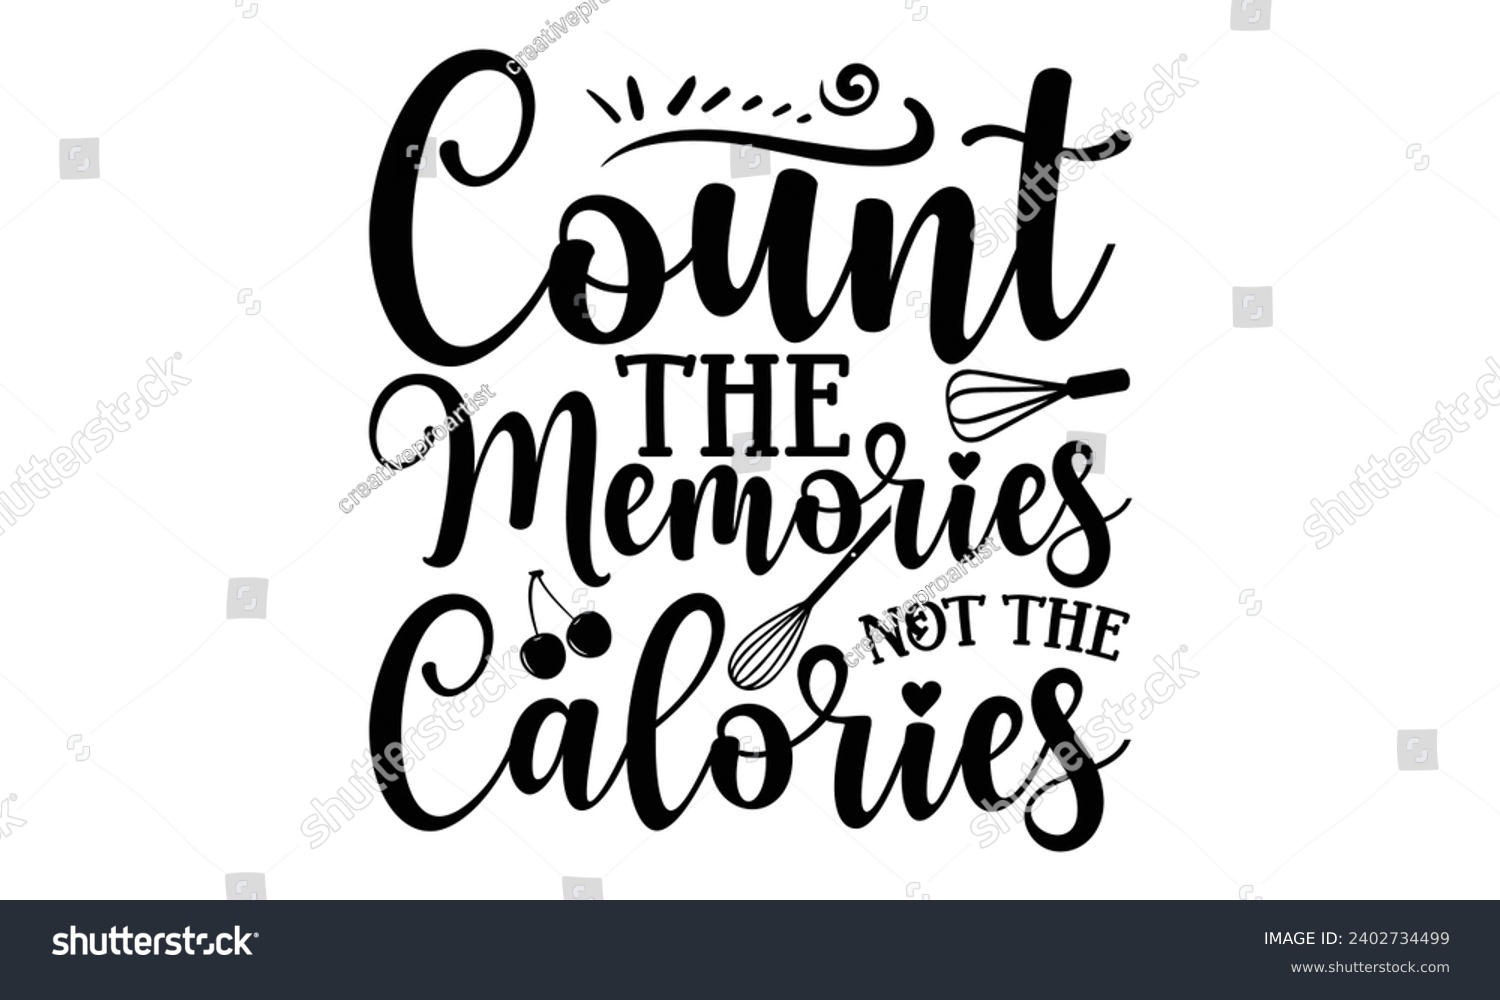 SVG of Count The Memories Not The Calories- Baking t- shirt design, This illustration can be used as a print on Template bags, stationary or as a poster, Isolated on white background. svg